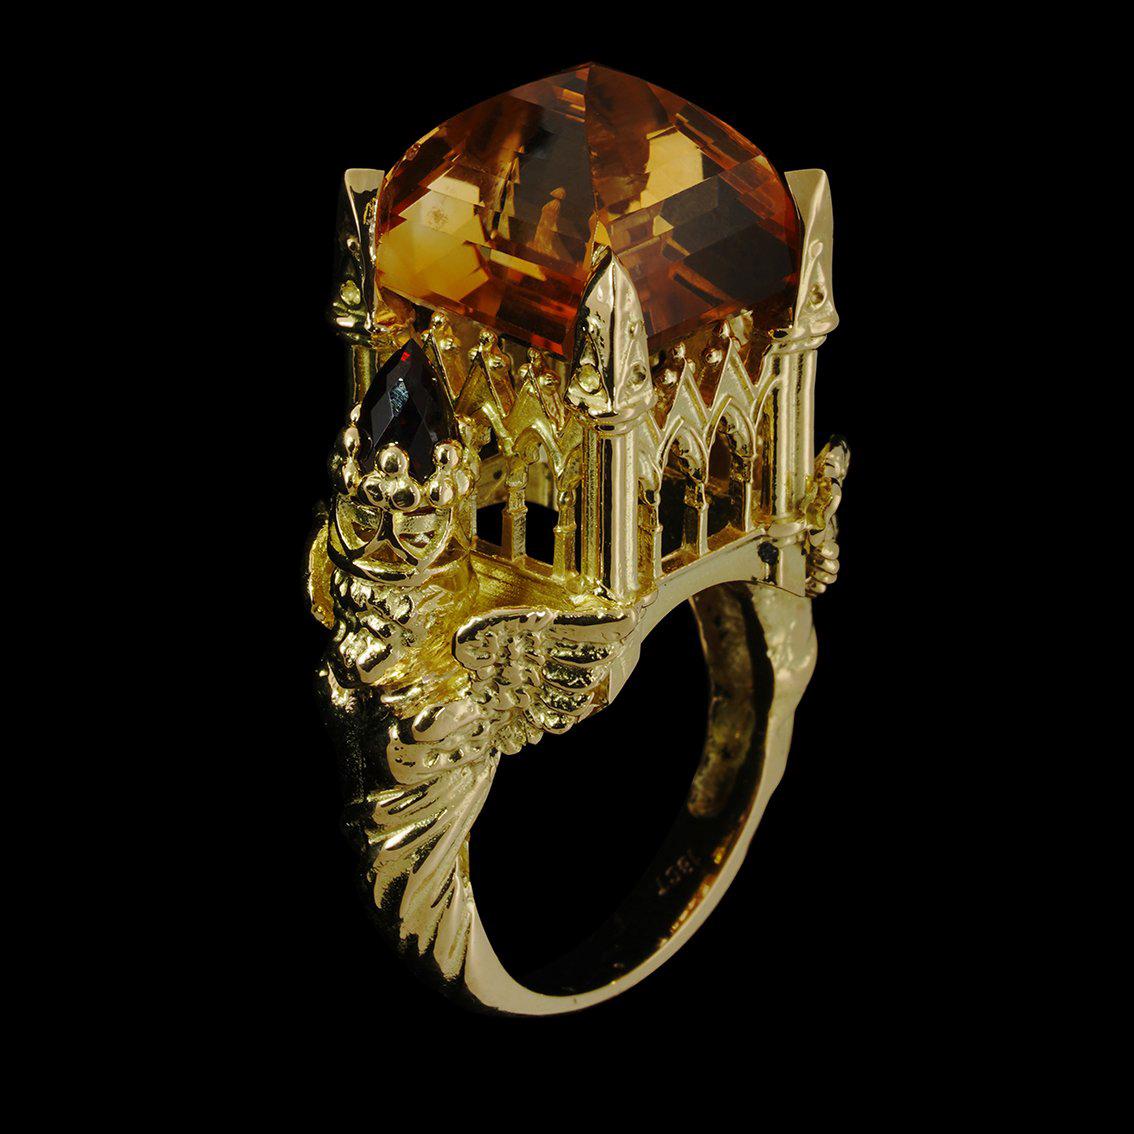 Gothic Cathedral Ring in 18 Karat Yellow Gold, Citrine and Garnets For Sale 7